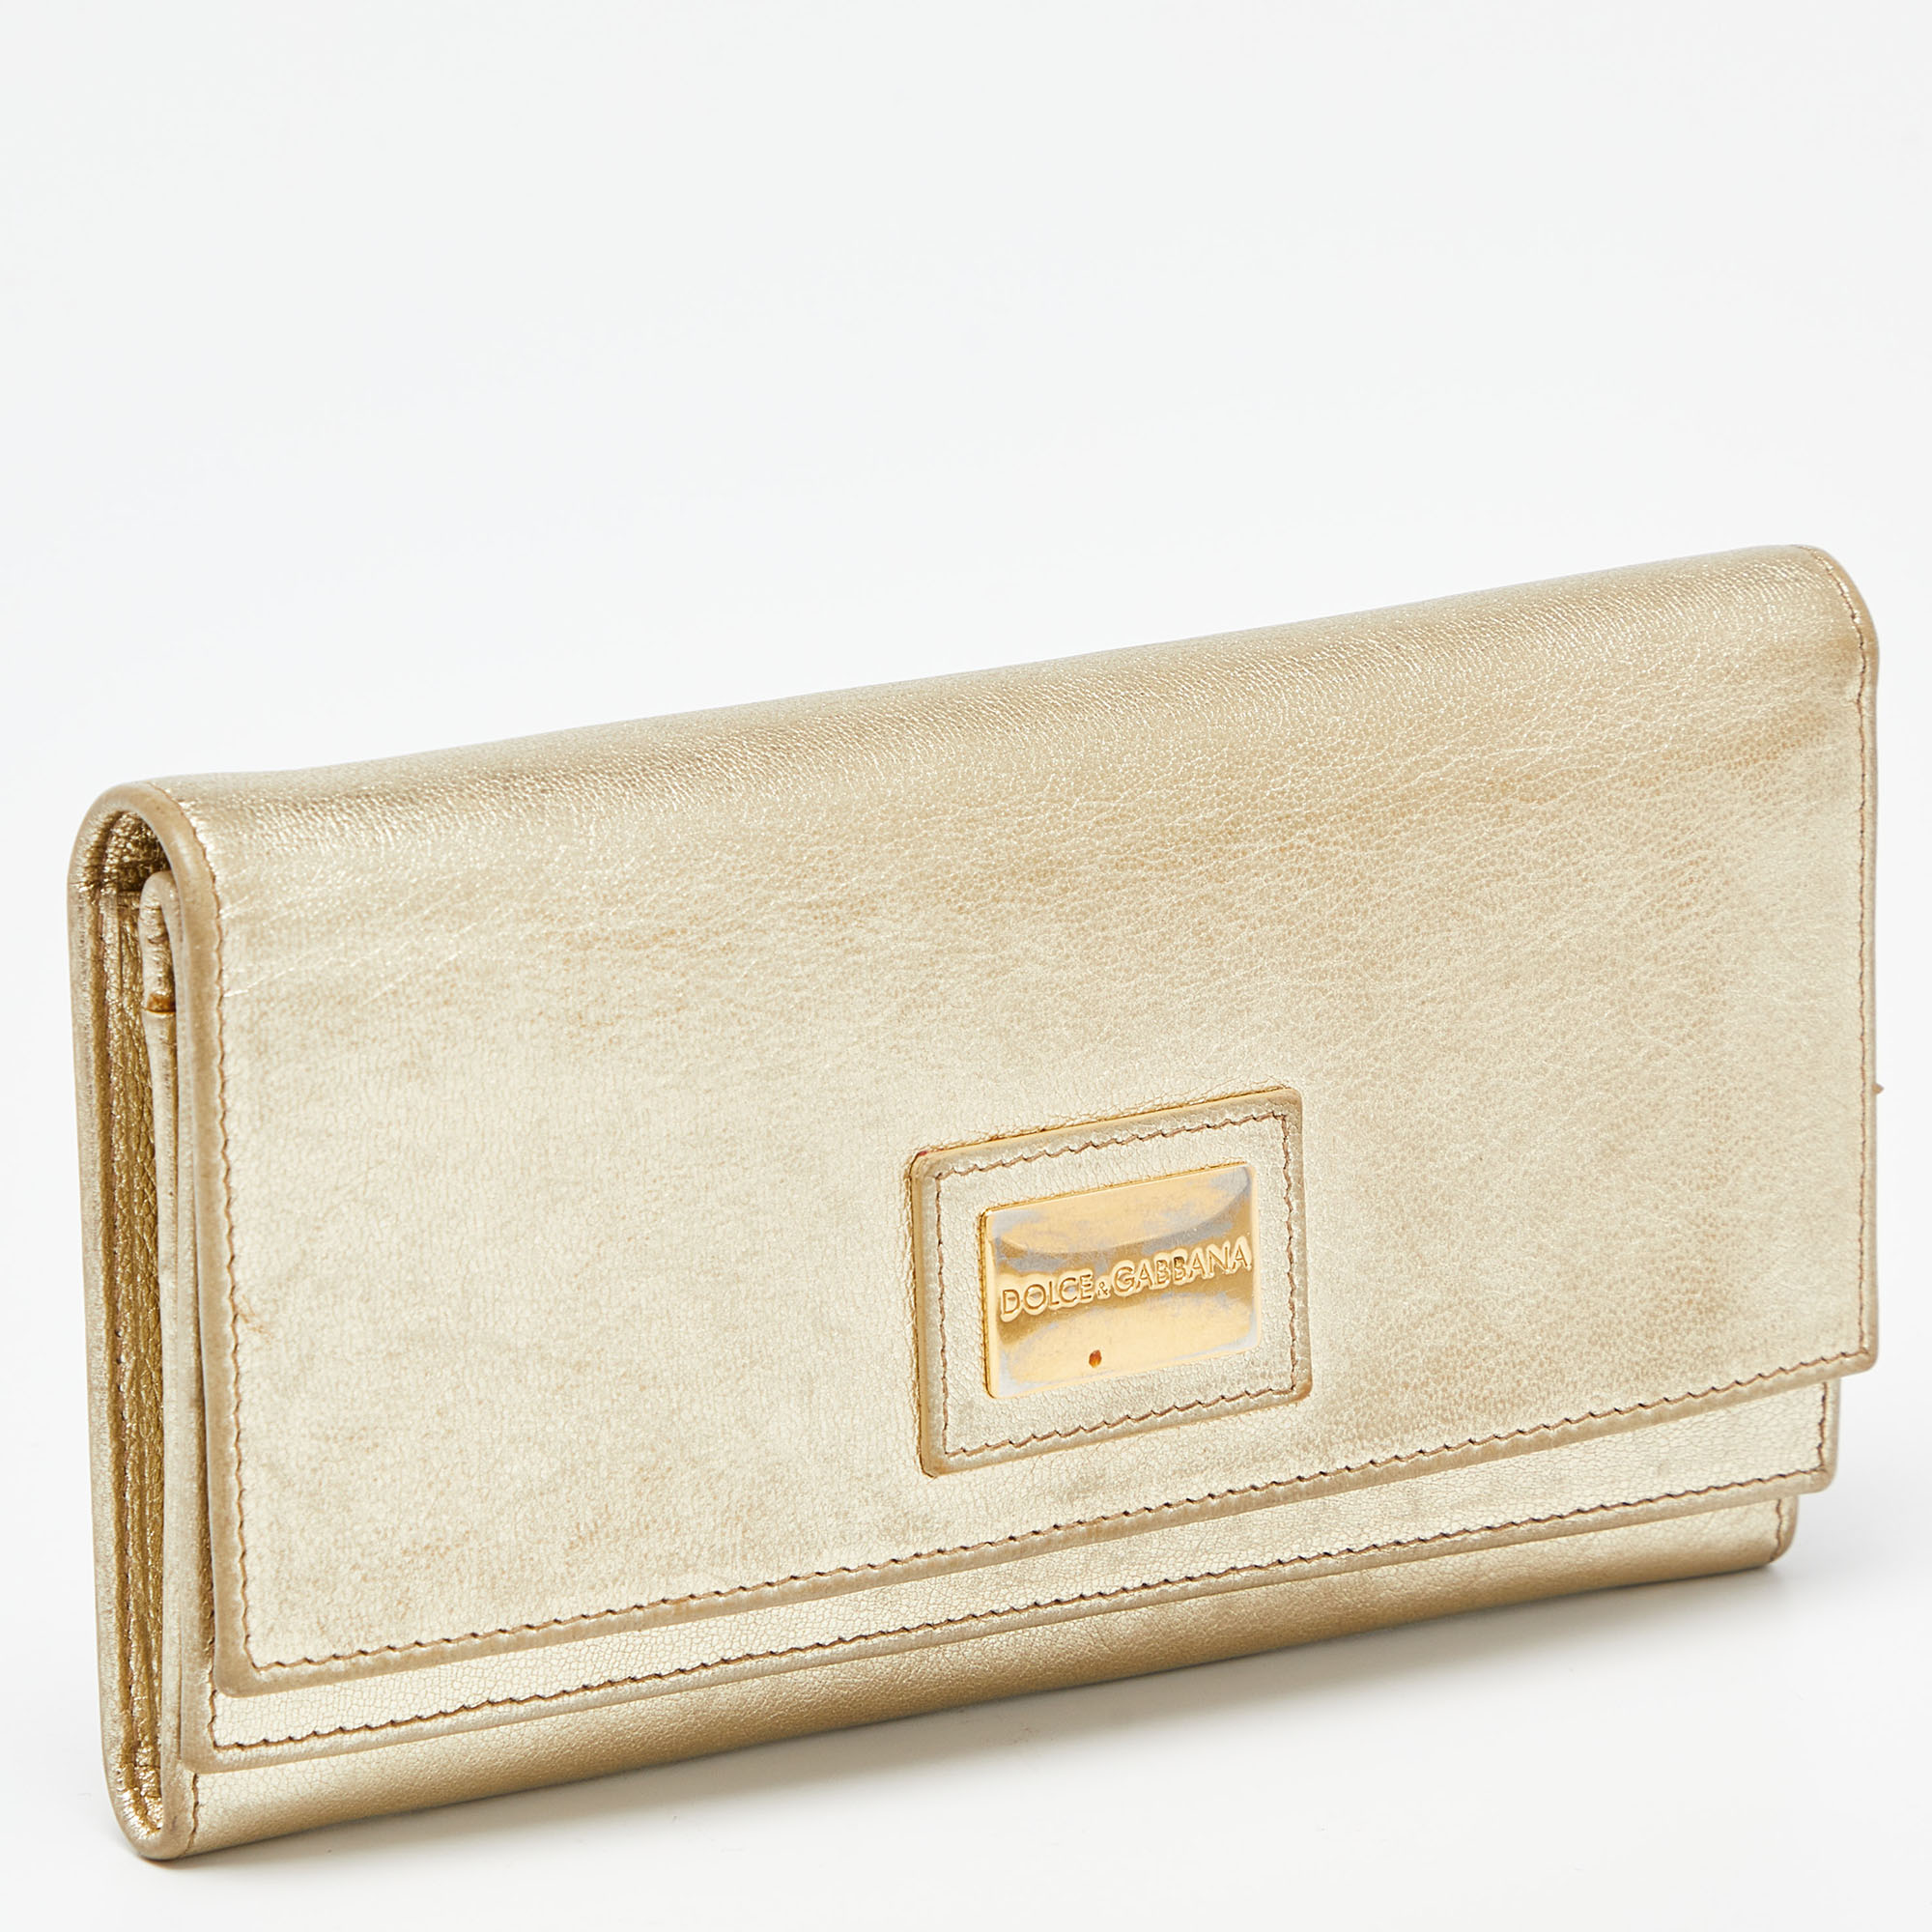 Dolce & Gabbana Gold Leather Continental Wallet